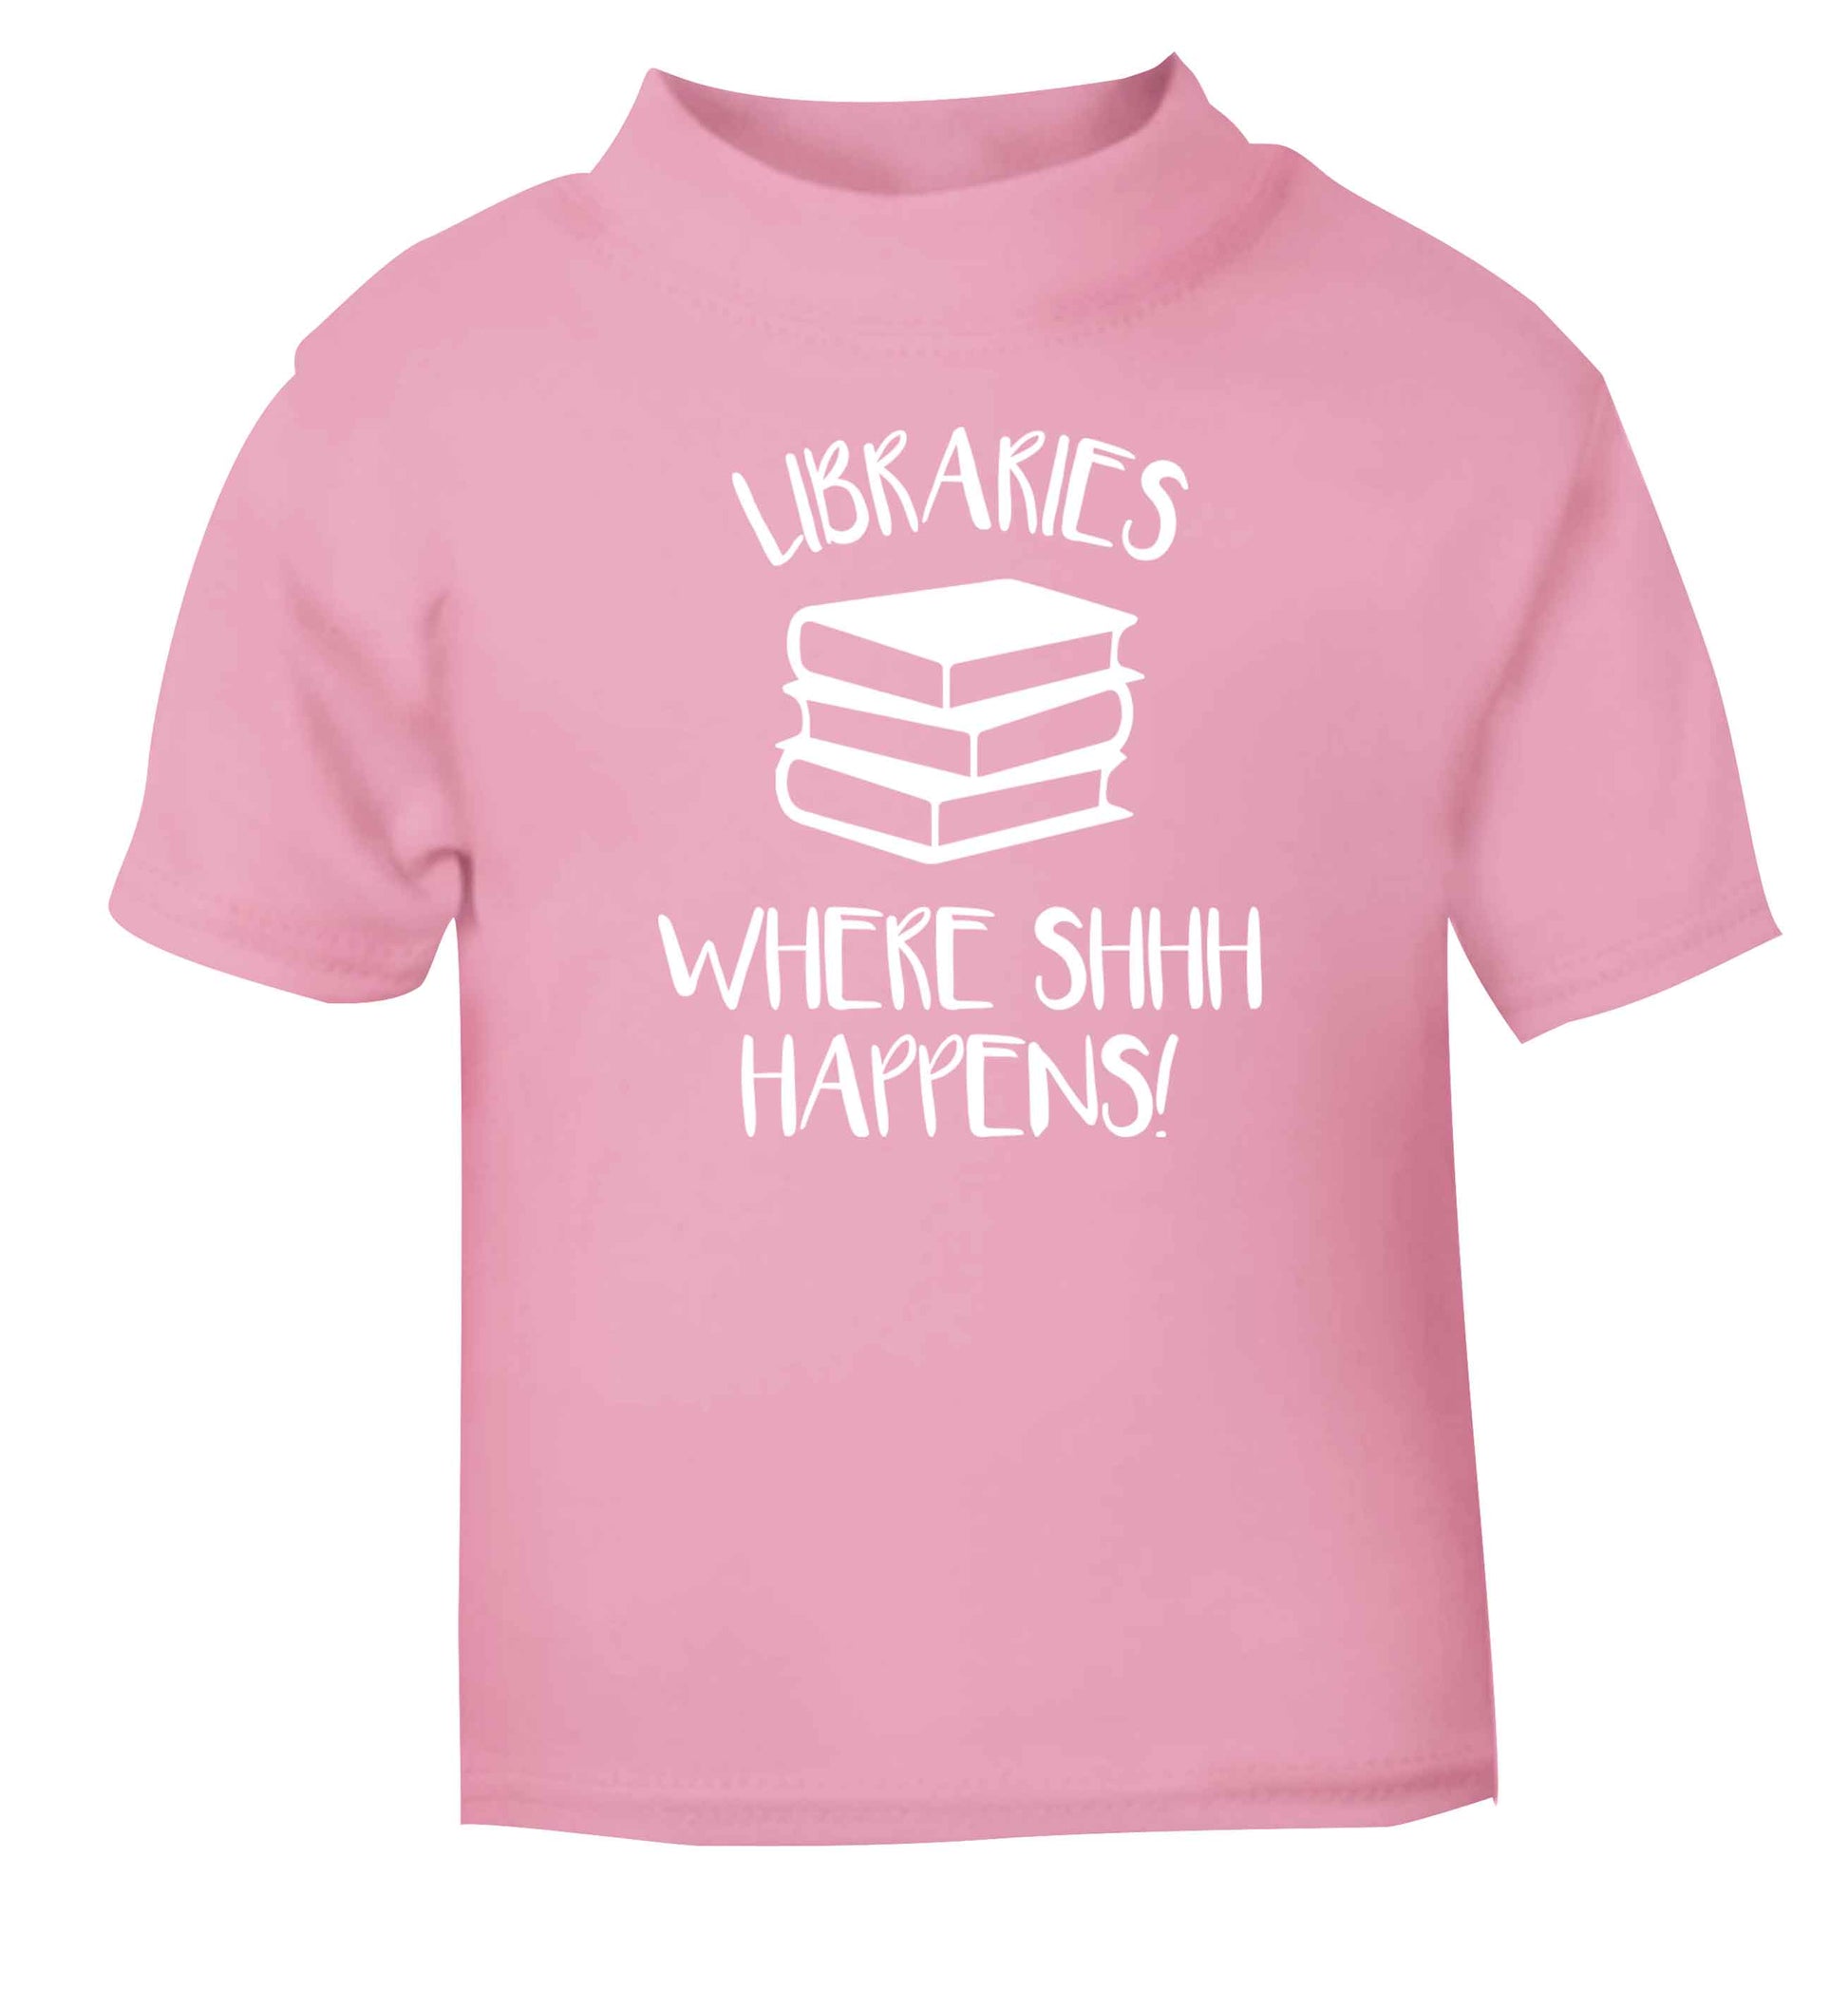 Libraries where shh happens! light pink Baby Toddler Tshirt 2 Years